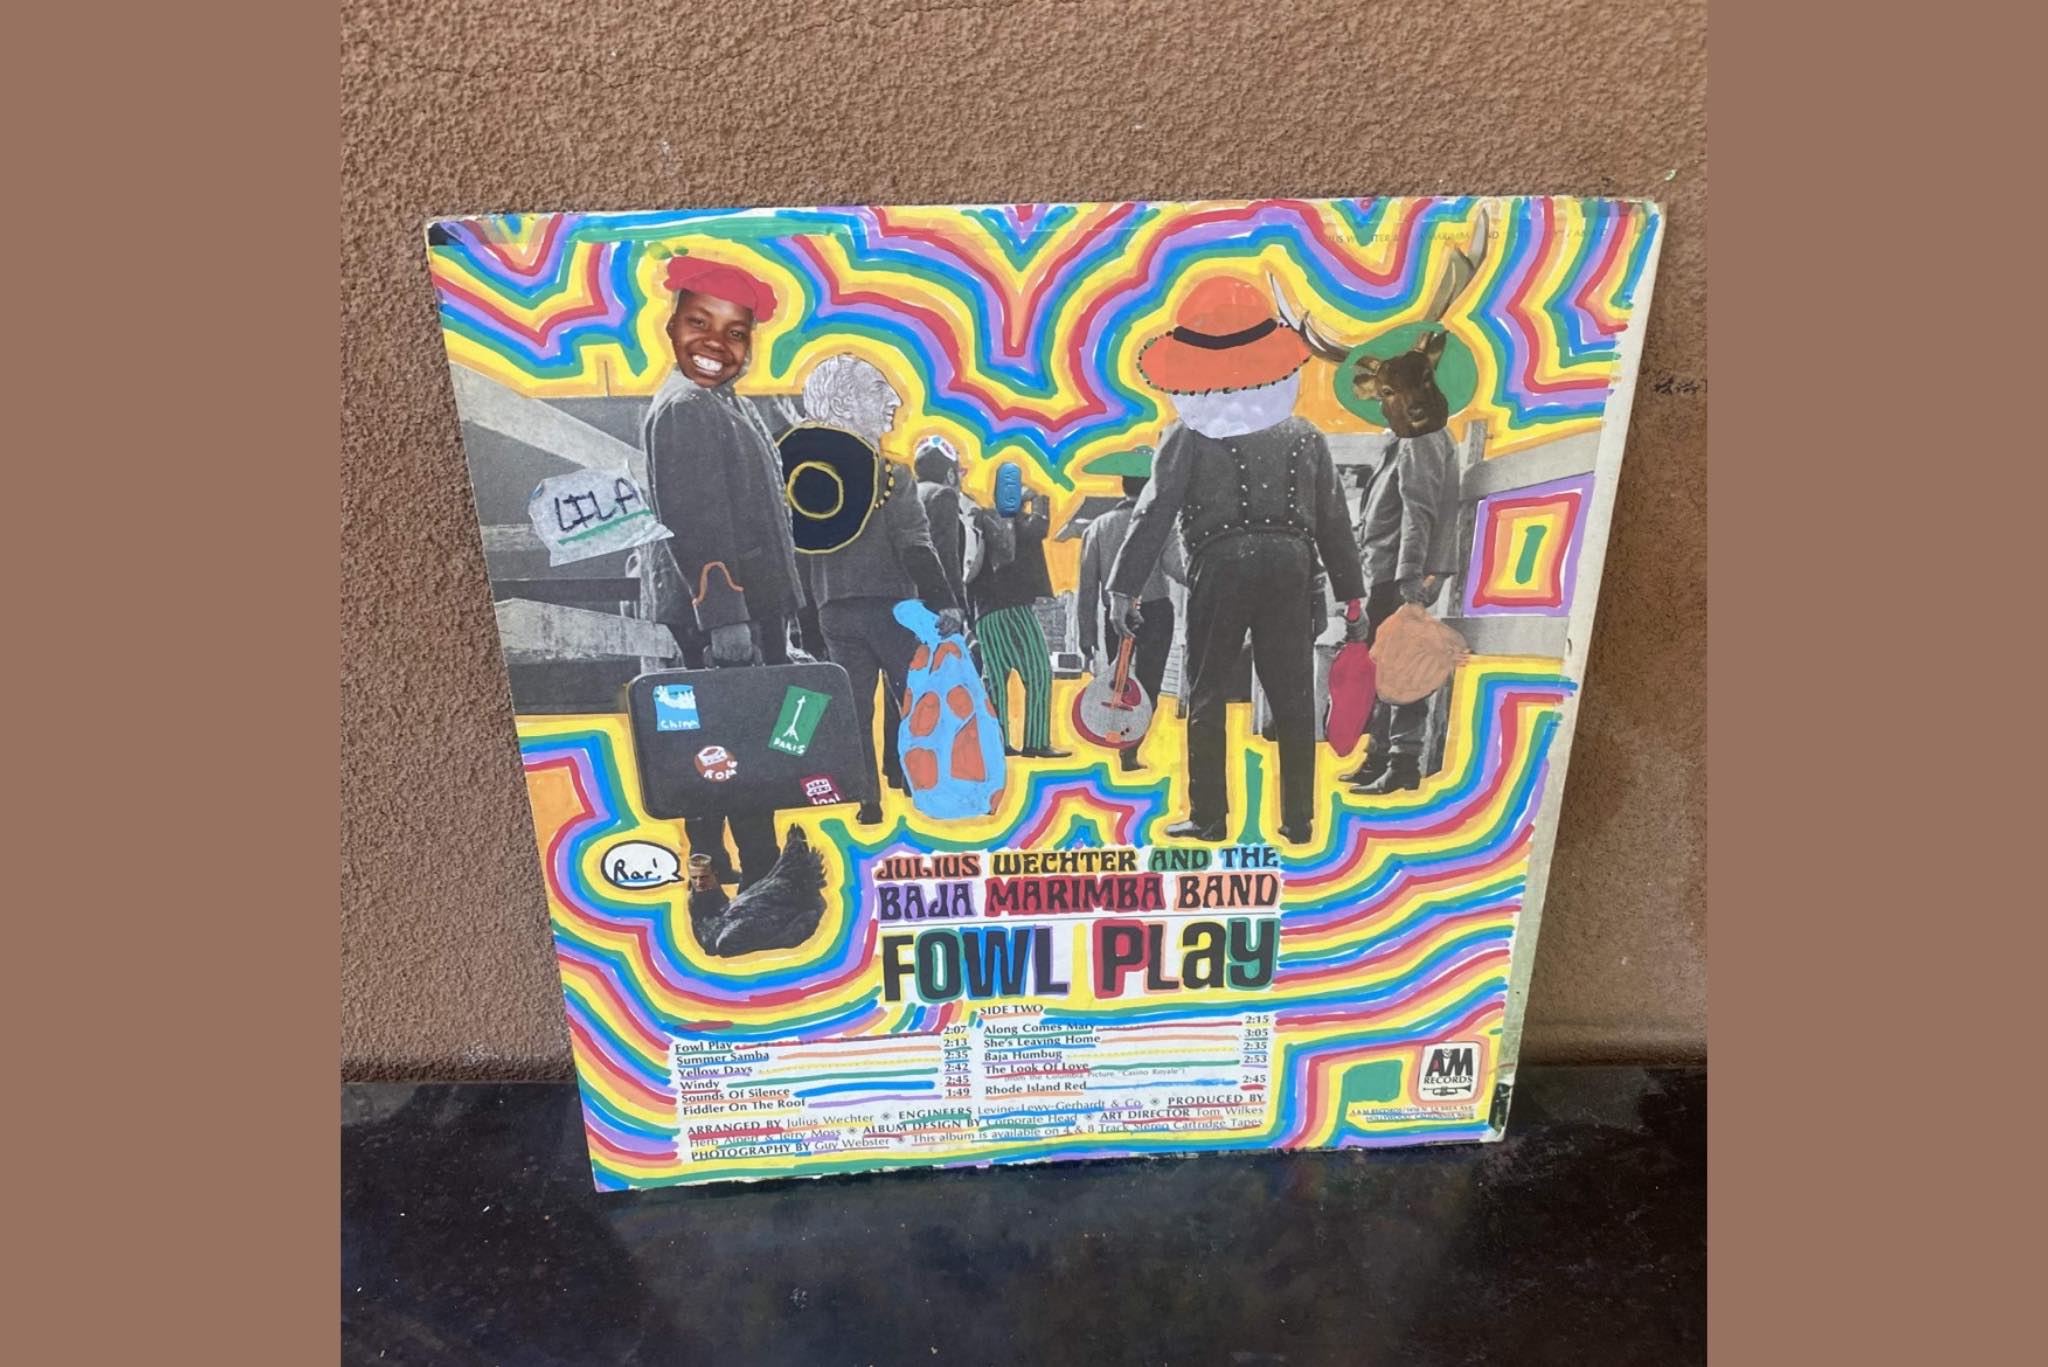 Student artwork painted on album cover